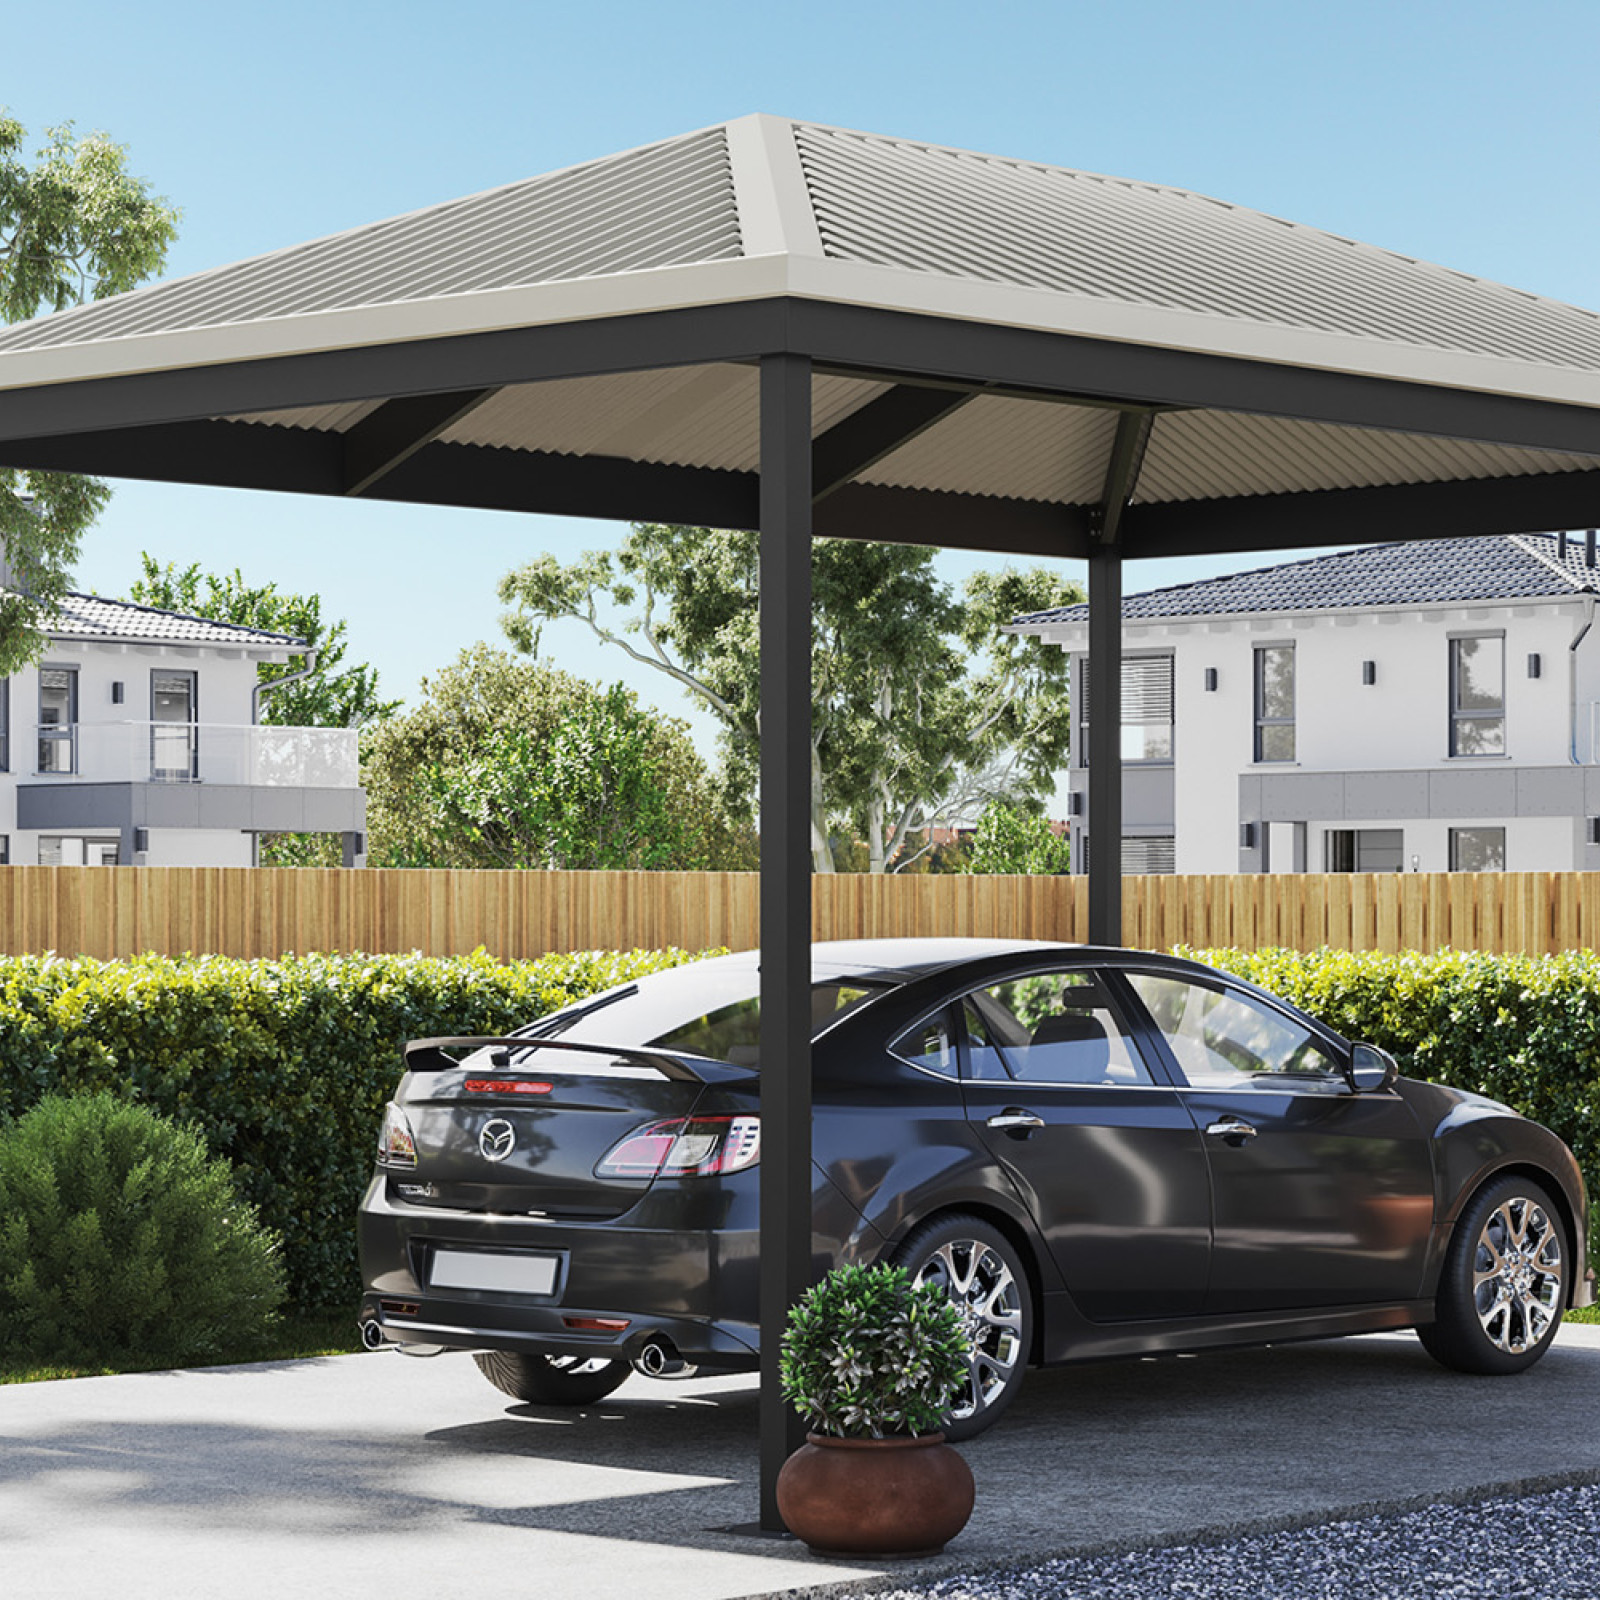 Hip roof carport with black car parked beneath